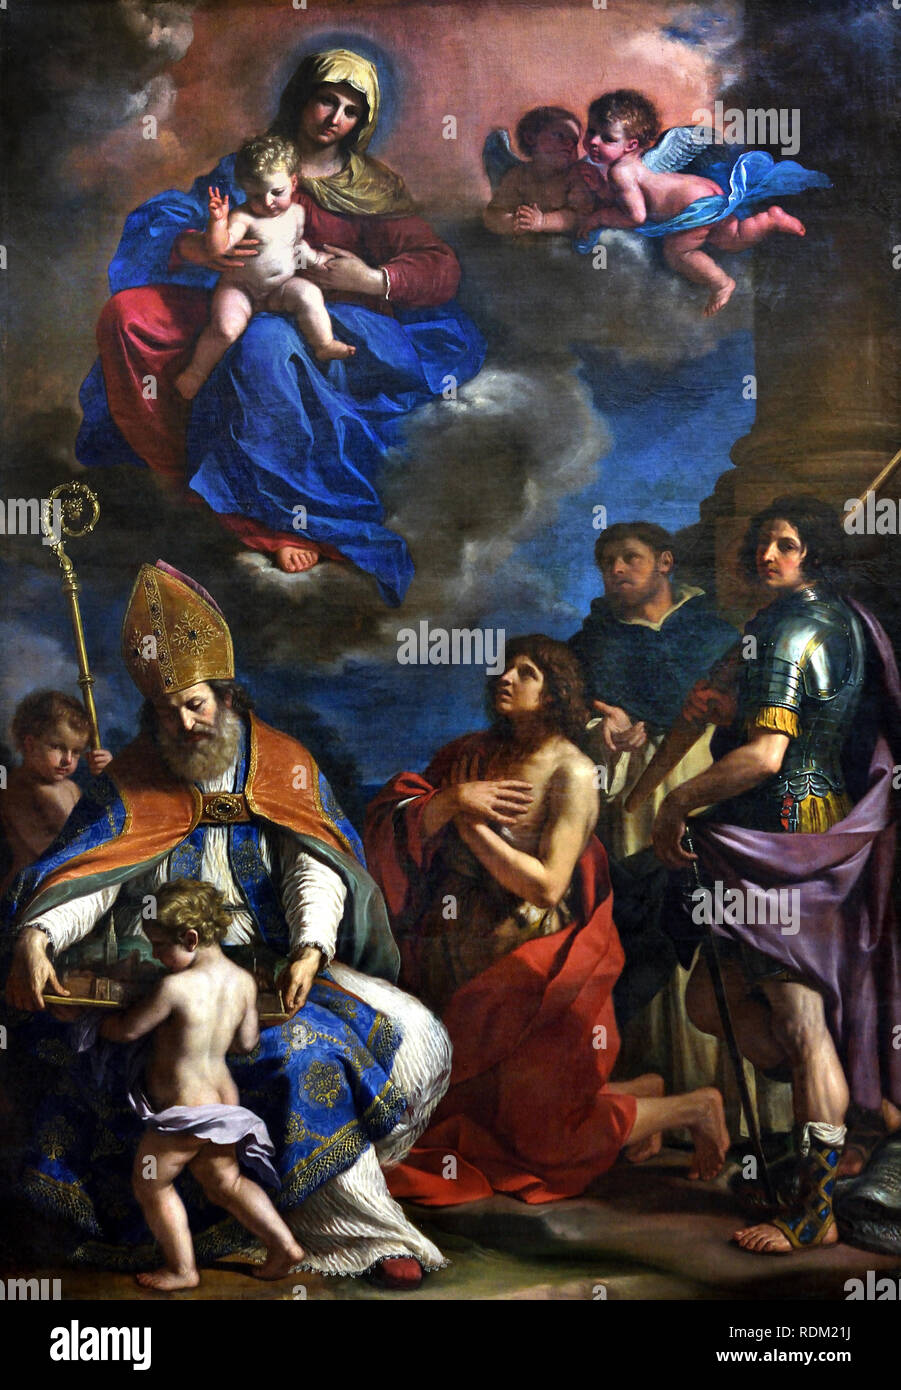 Giovanni Francesco BARBIERI, known as THE GUERCHIN, Madonna and Child with four saints (St. Geminian, St. John the Baptist, St. George and St. Peter Martyr), 1651 (GUERCINO) (b. 1591, Cento, d. 1666, Bologna) Virgin and Child with Four Saints France, French, Stock Photo